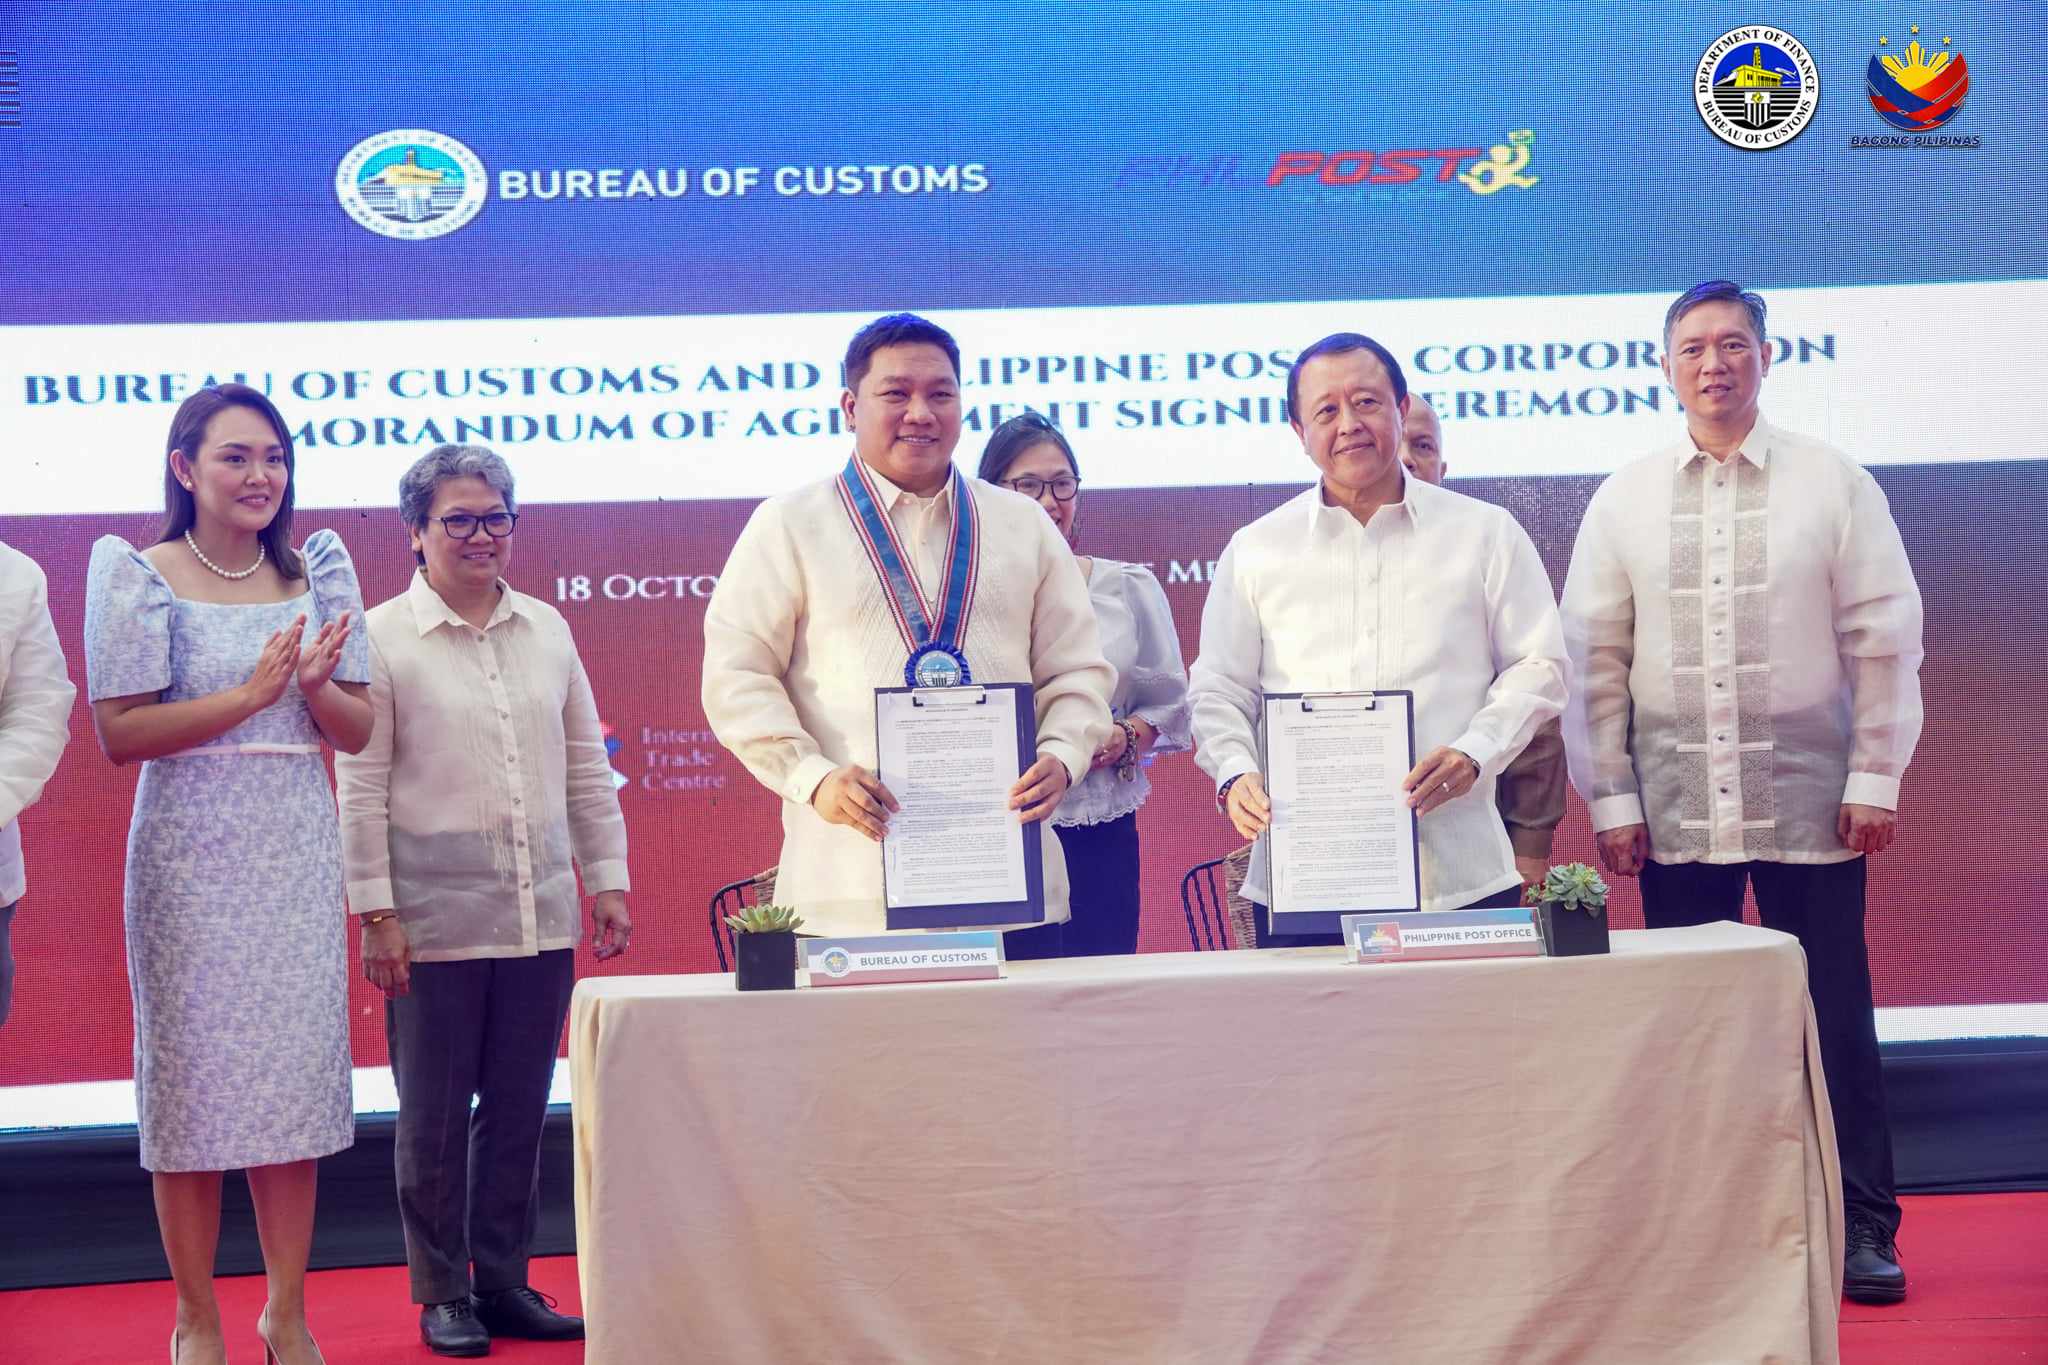 PHLPost and Customs ink MOA for efficient postal and customs transactions